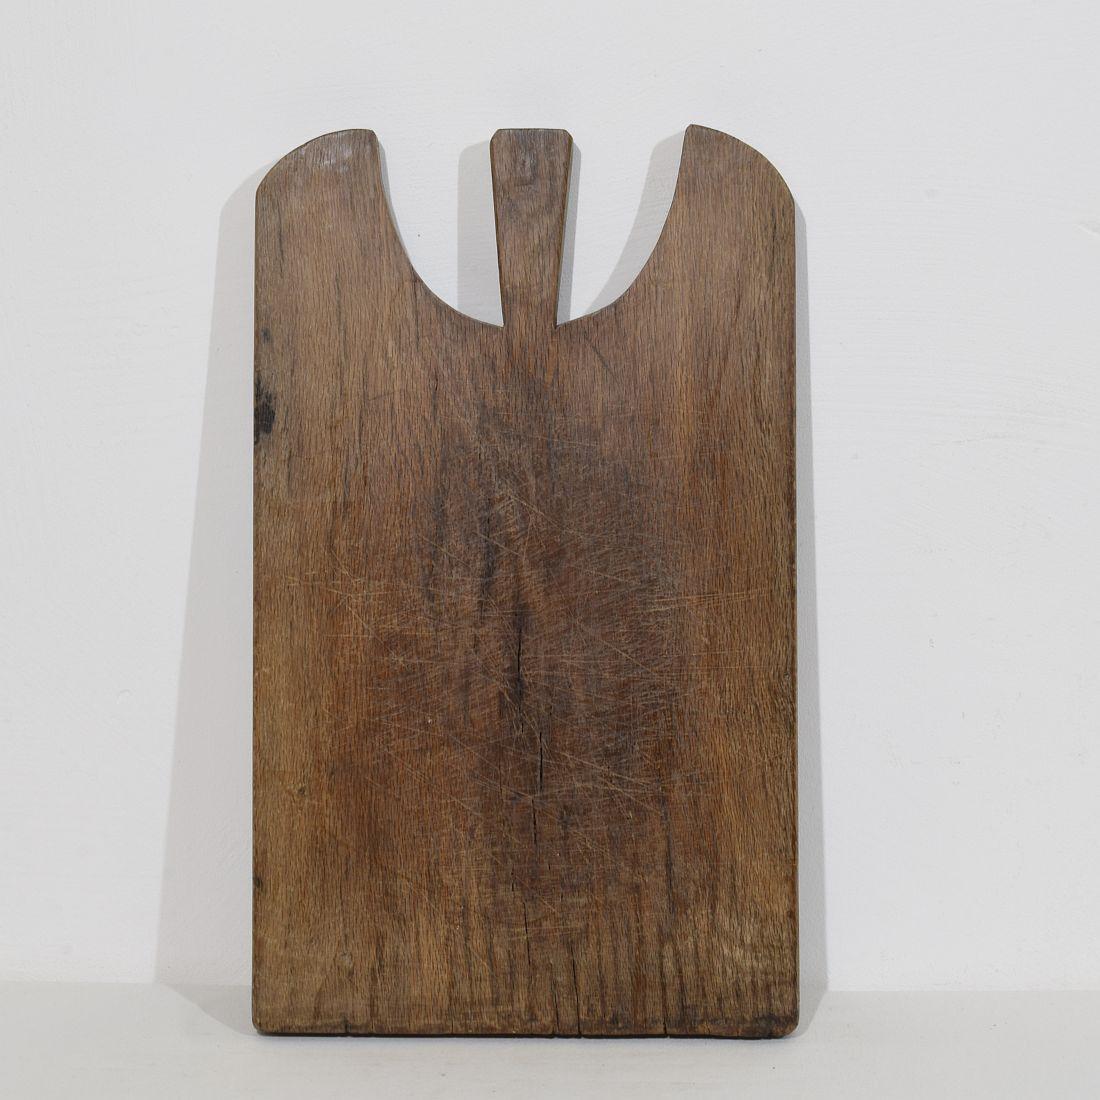 French Provincial Collection of Four Rare French, 19th Century, Wooden Chopping or Cutting Boards